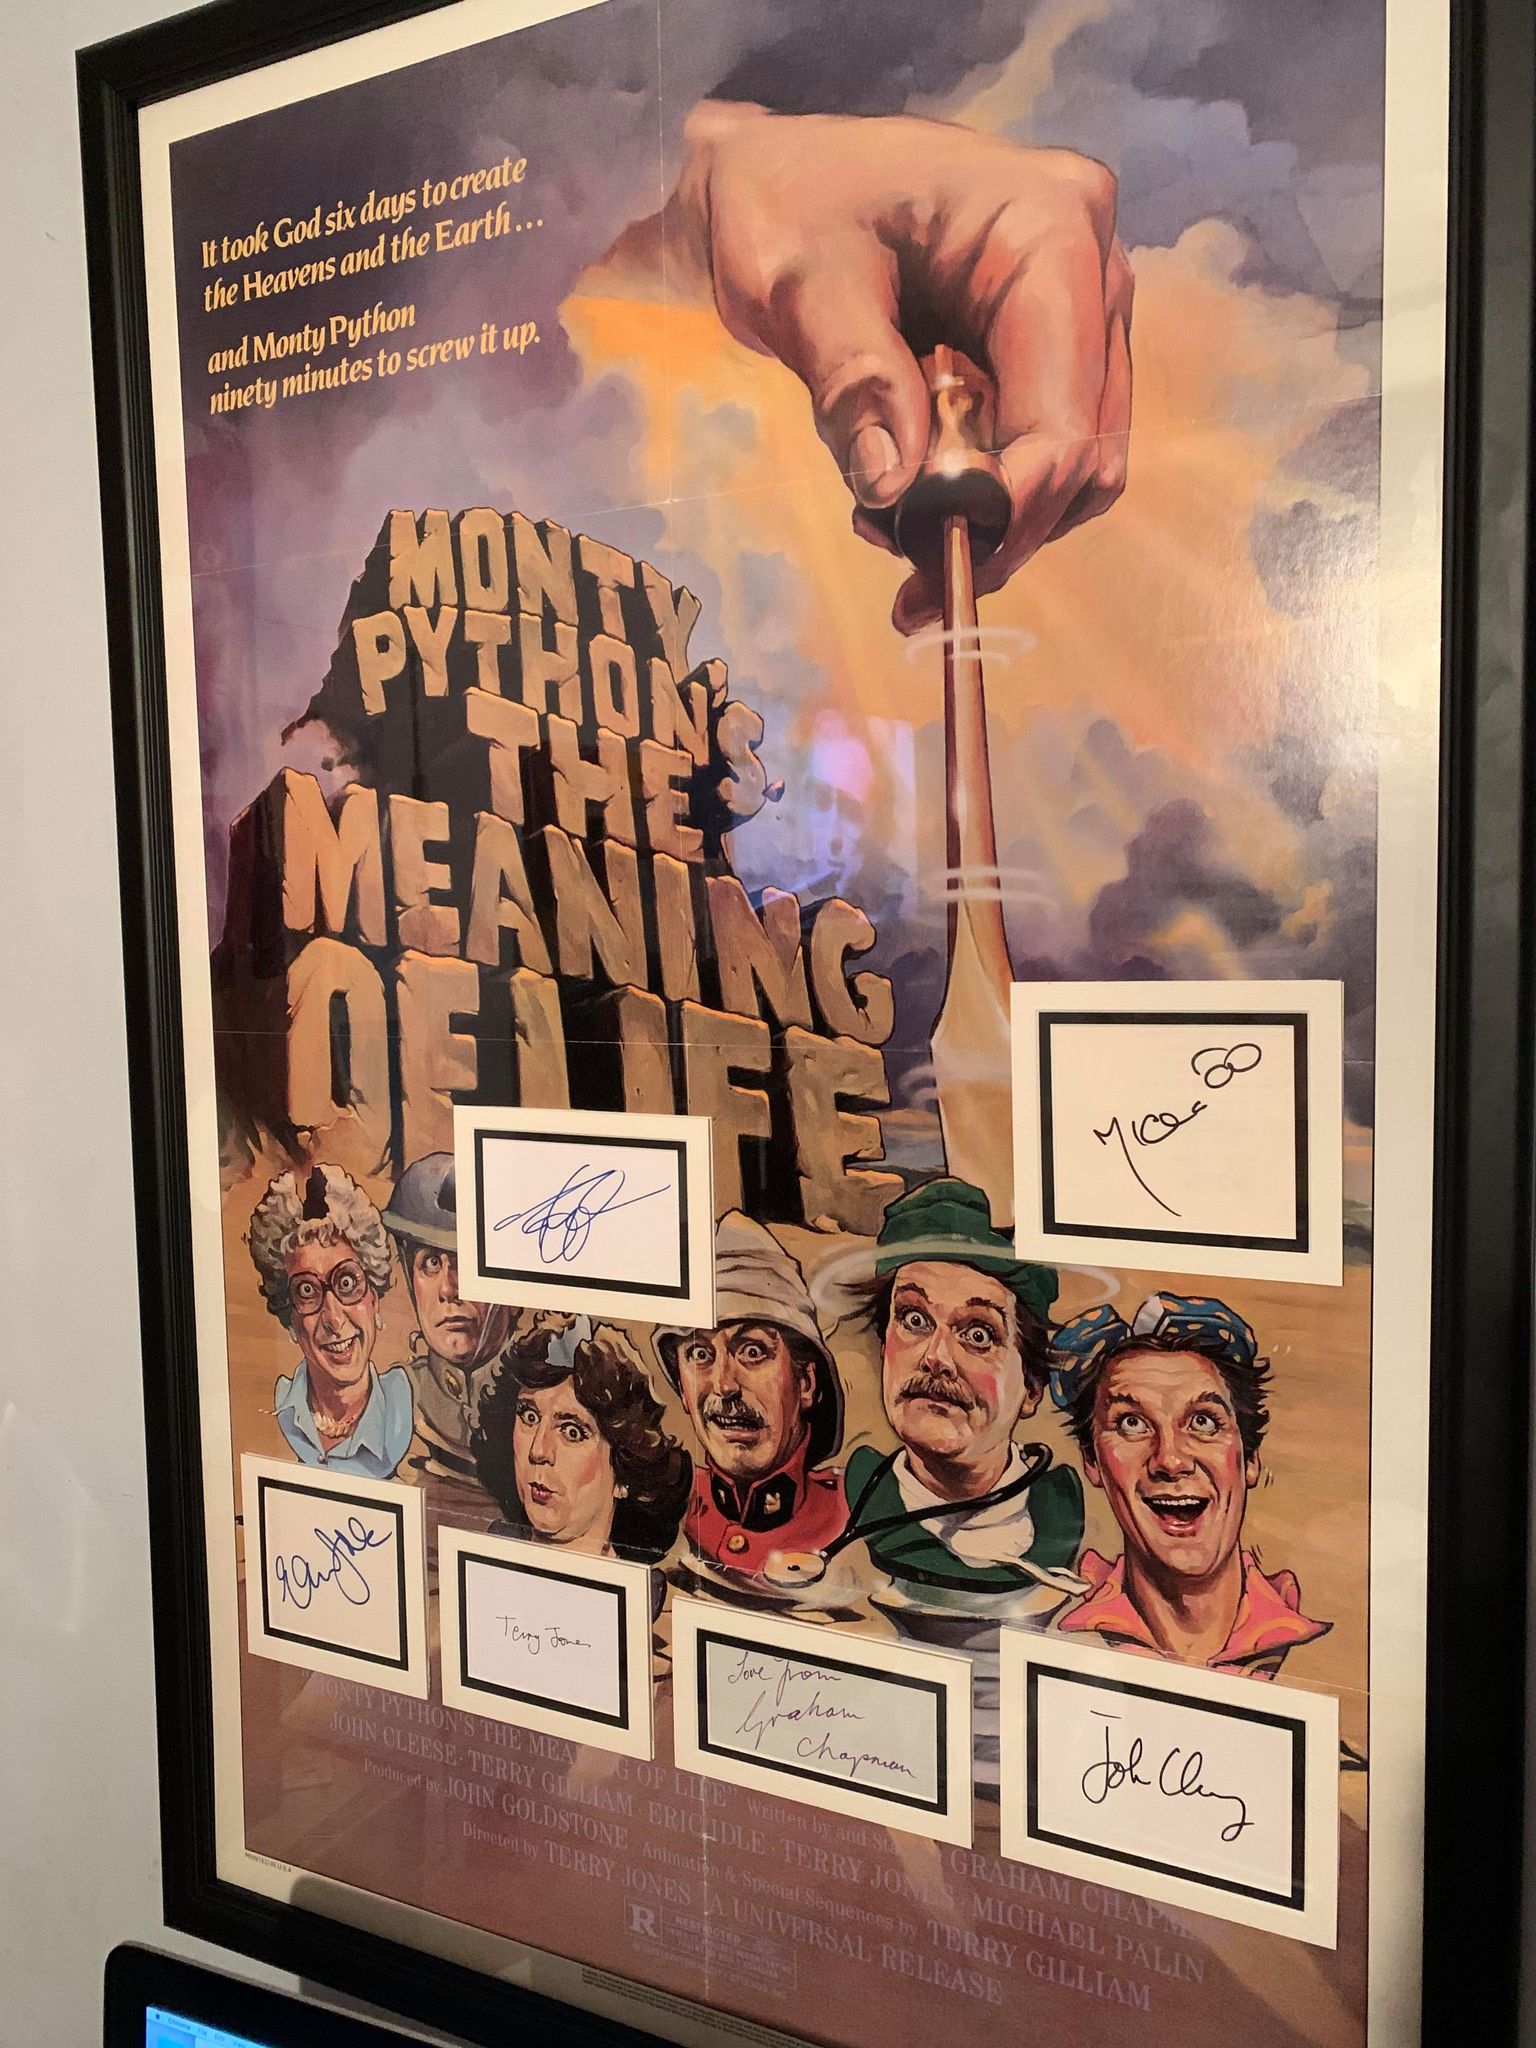 A poster signed by Monty Python actor John Cleese, Michael Palin, Terry Jones, Terry Gilliam, Graham Chapman, Eric Idle